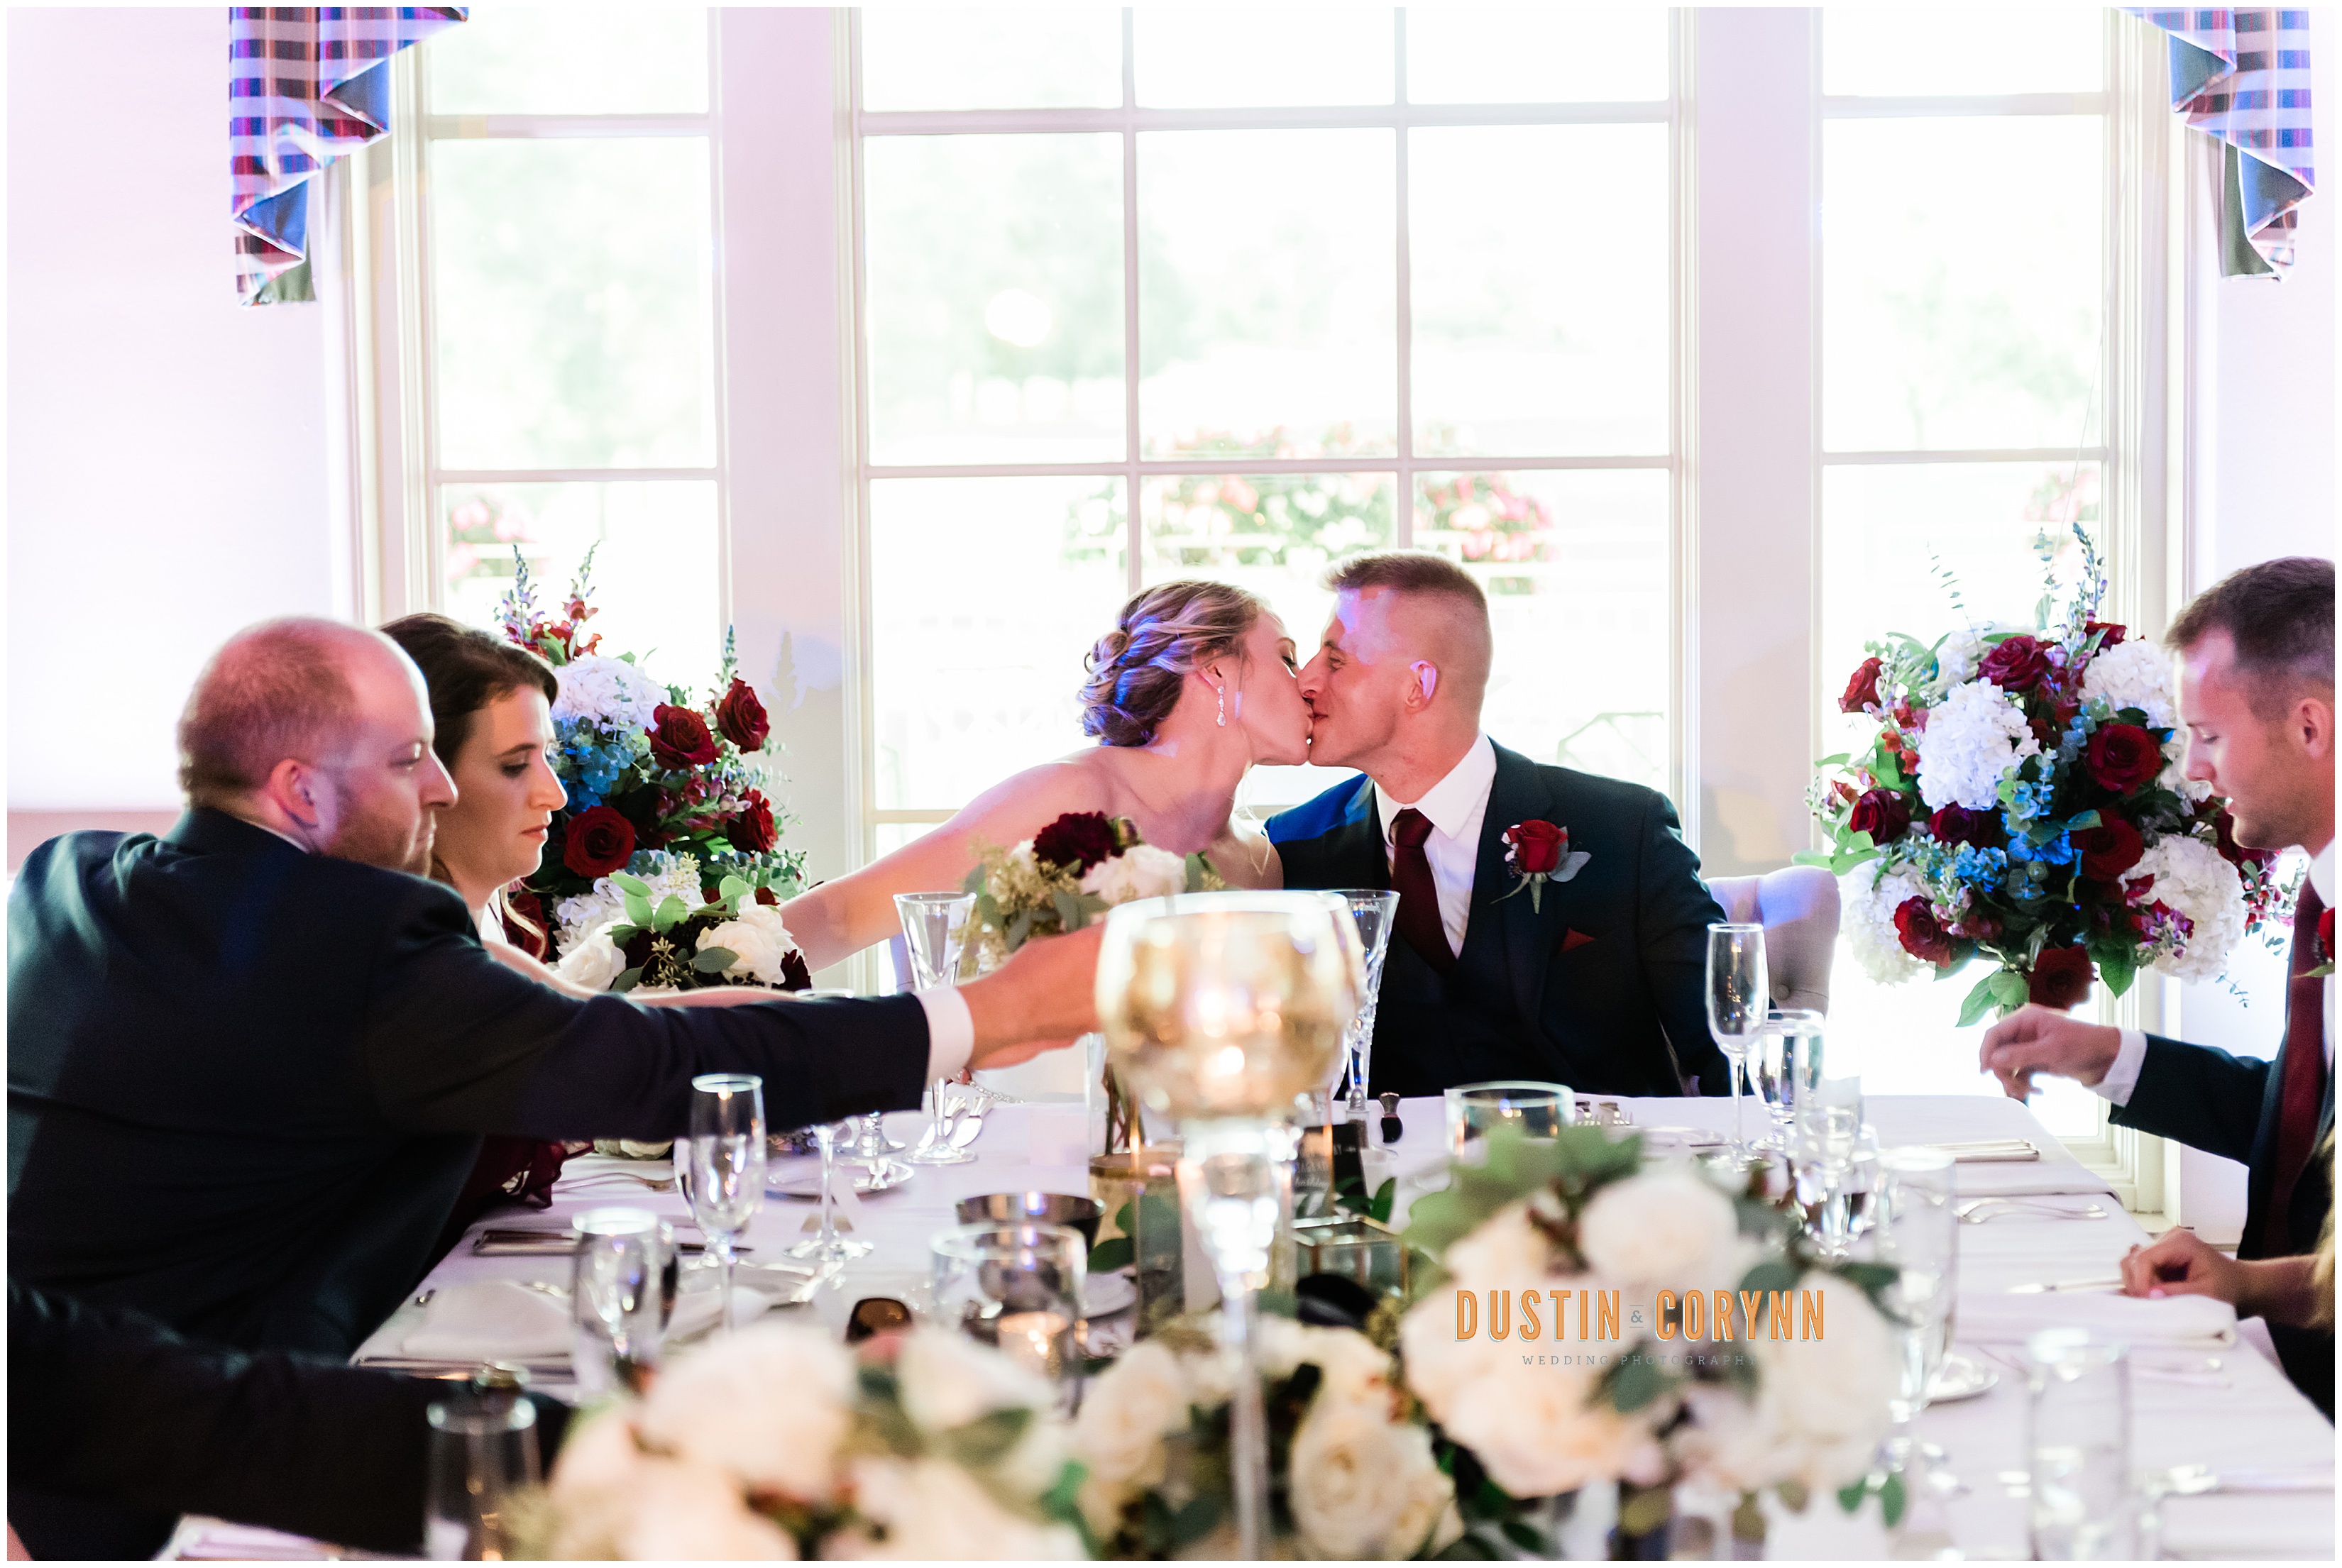 Kiss at the Headtable